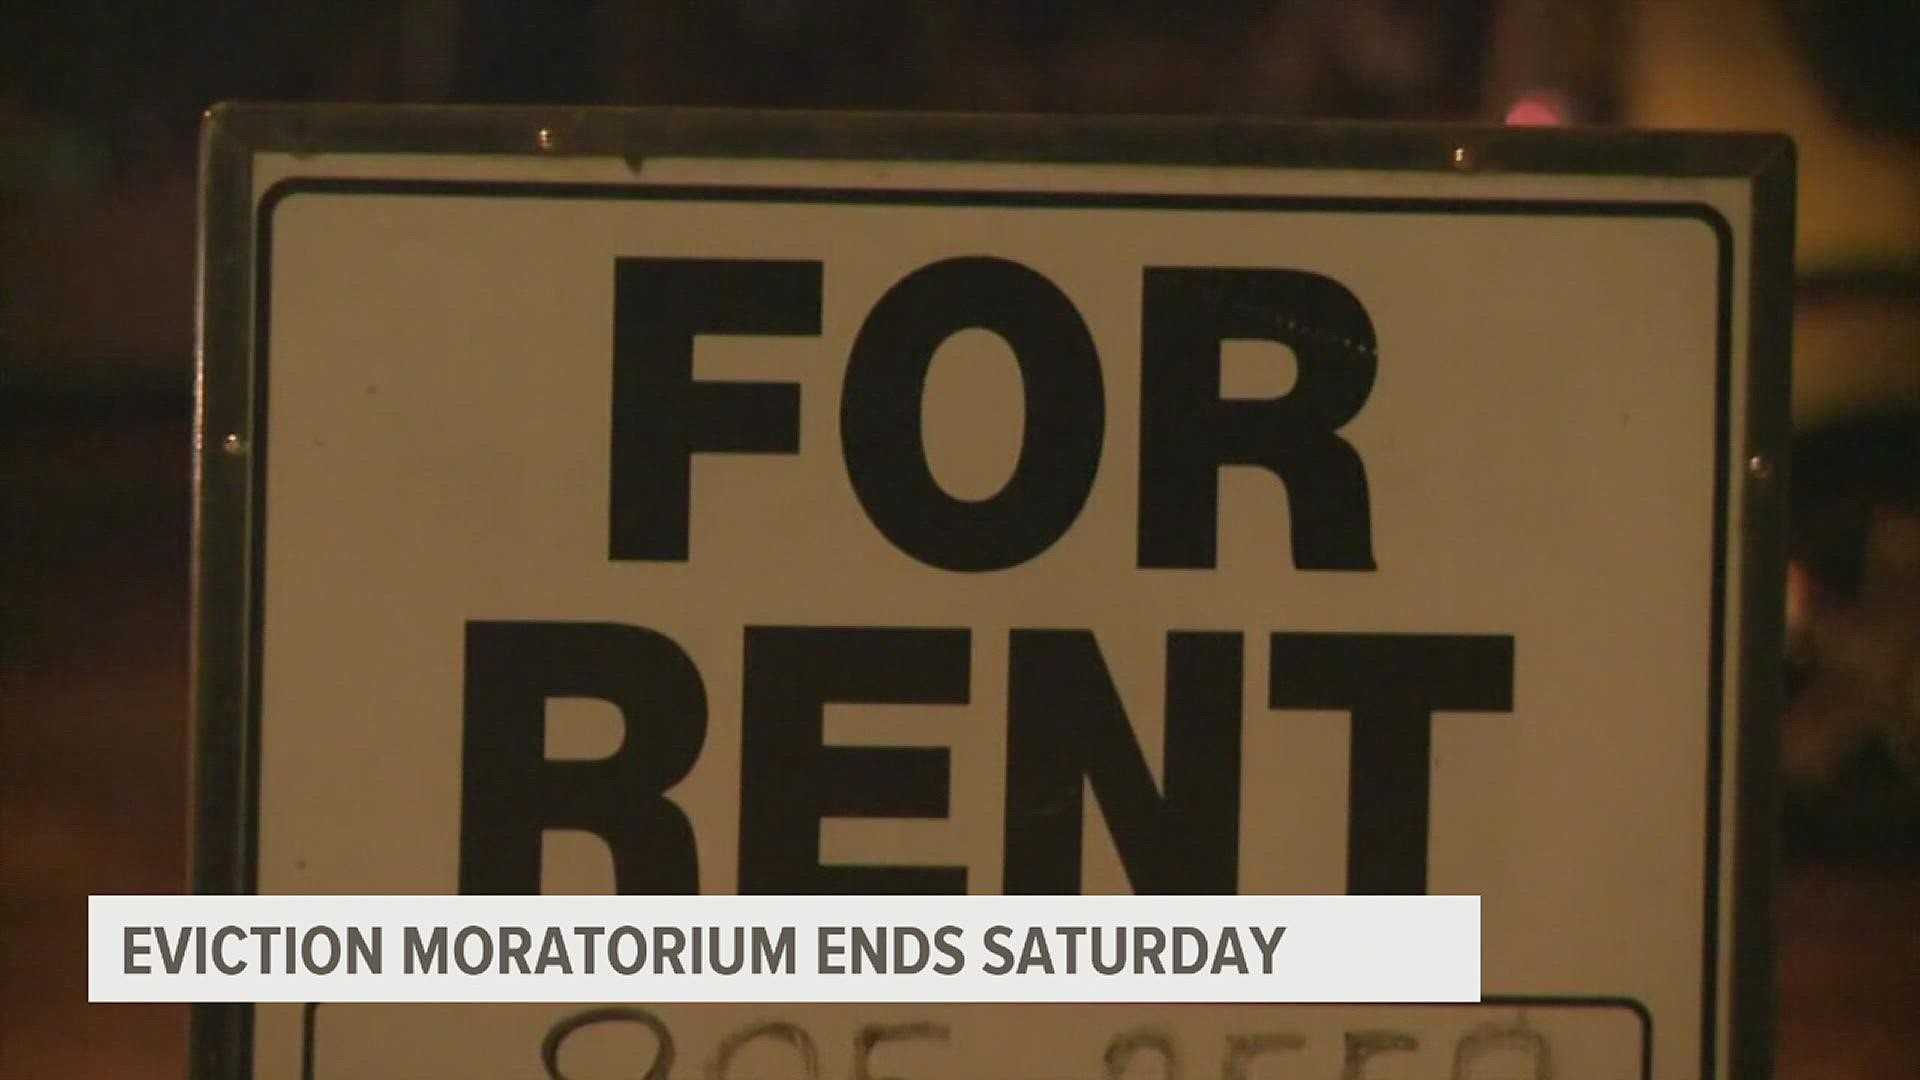 The National Eviction Moratorium ended Saturday, but there is help out there for struggling families.